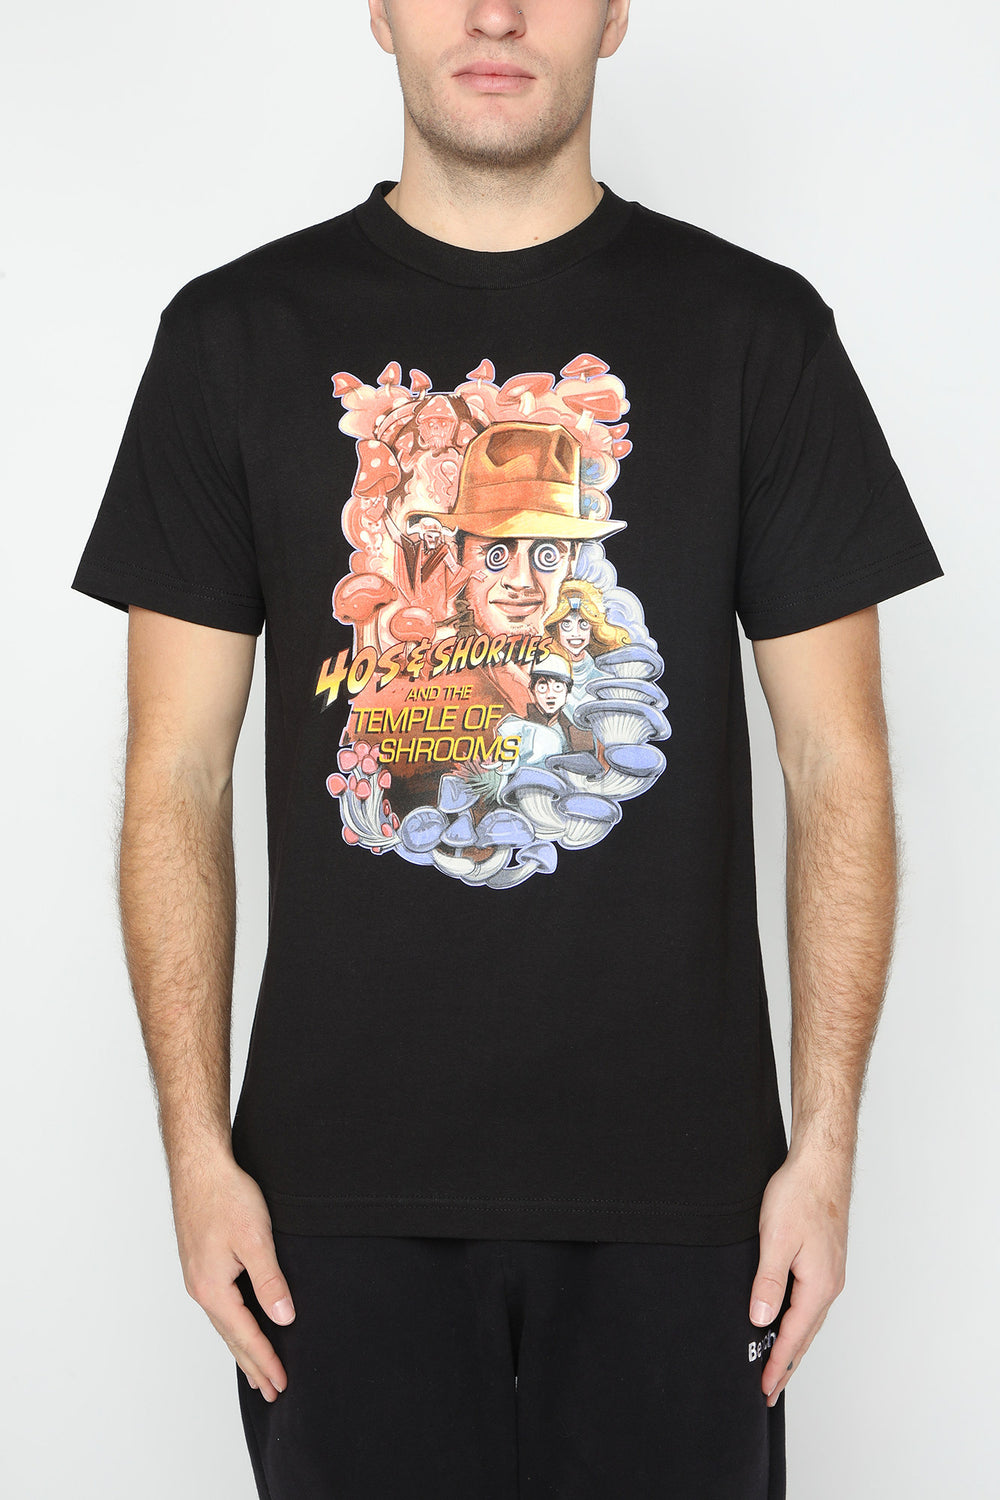 40s & Shorties Temple of Shrooms T-Shirt Black